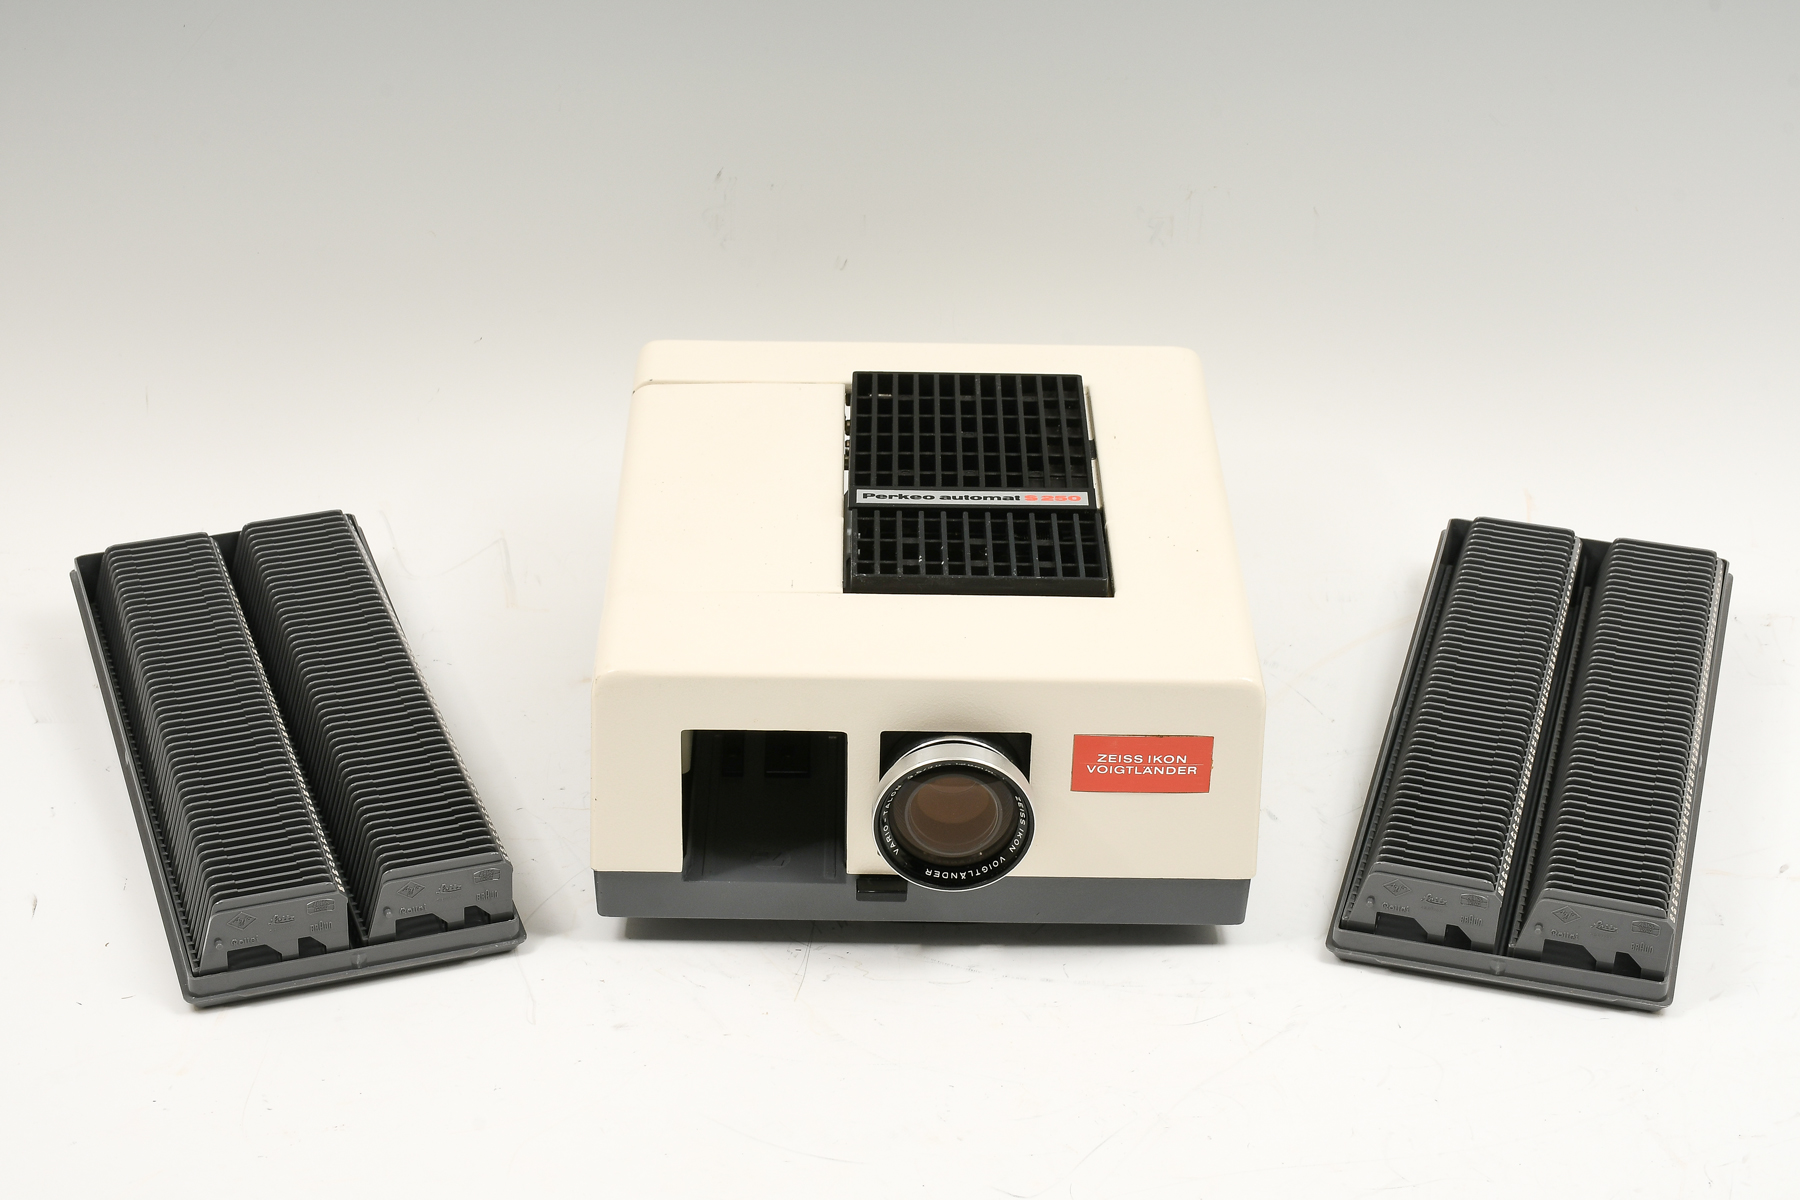 ZEISS SLIDE PROJECTOR WITH CARTRIDGES: